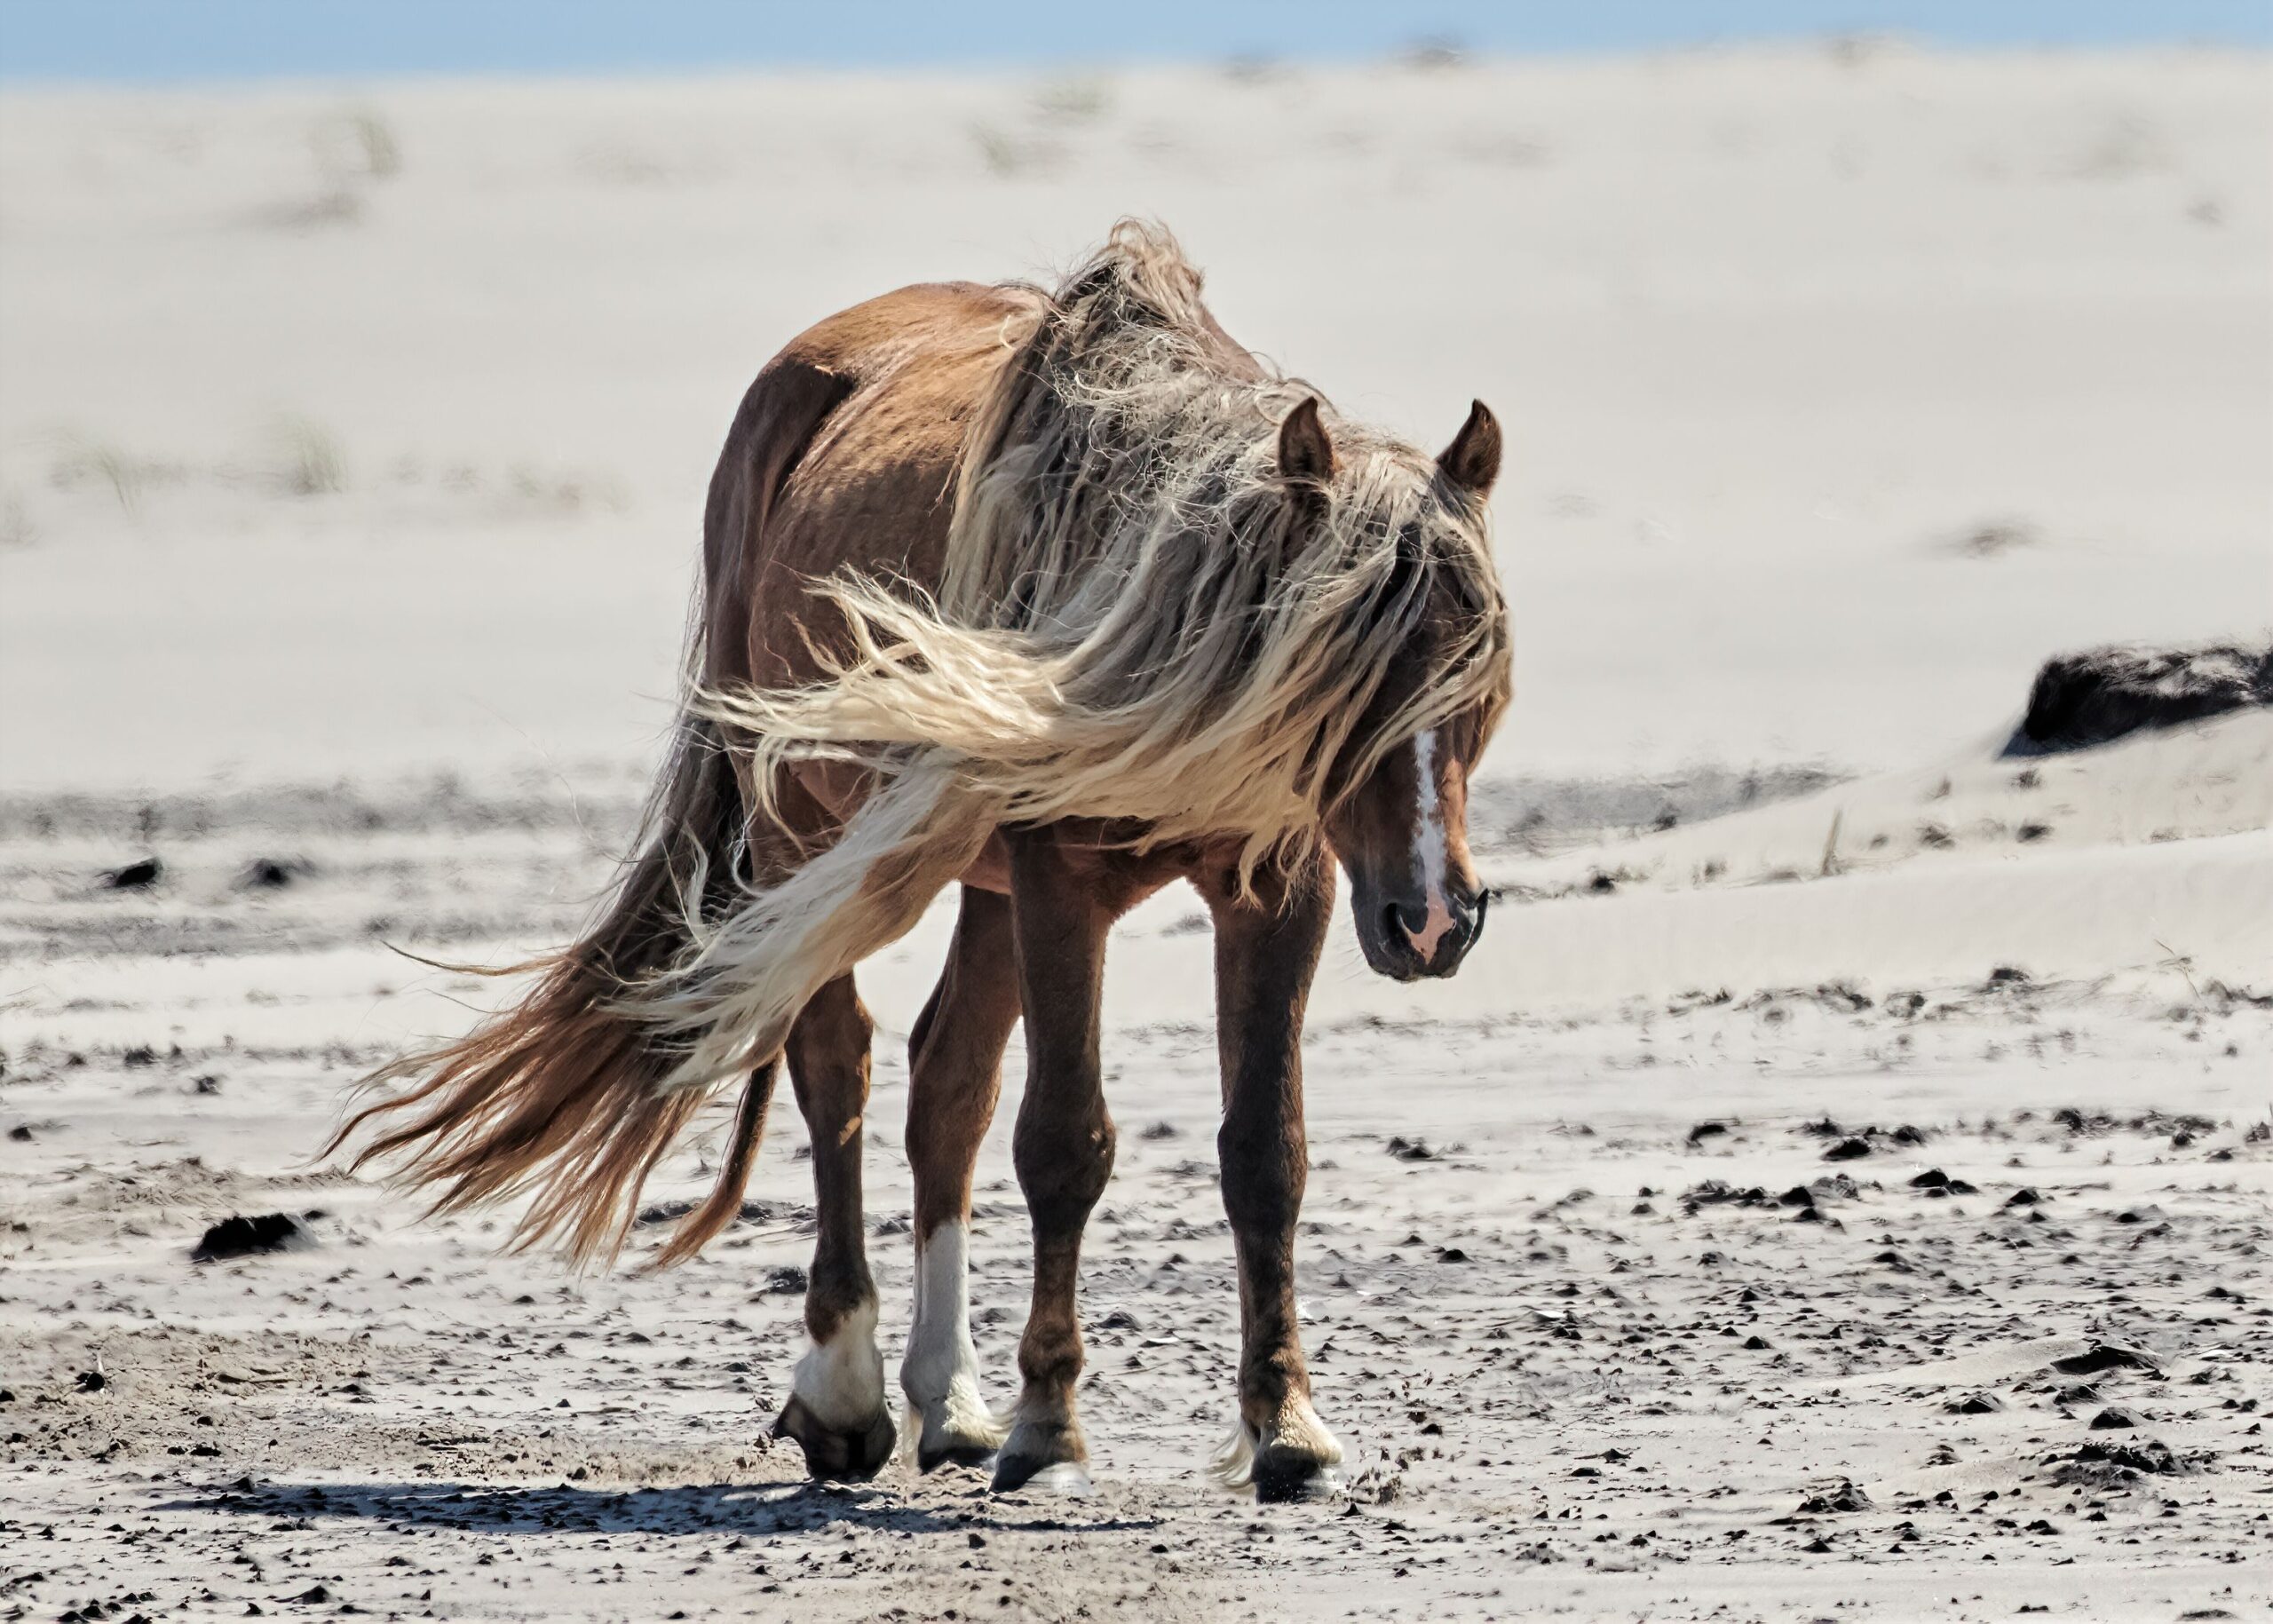 A scenic view of a horse walking on the beach